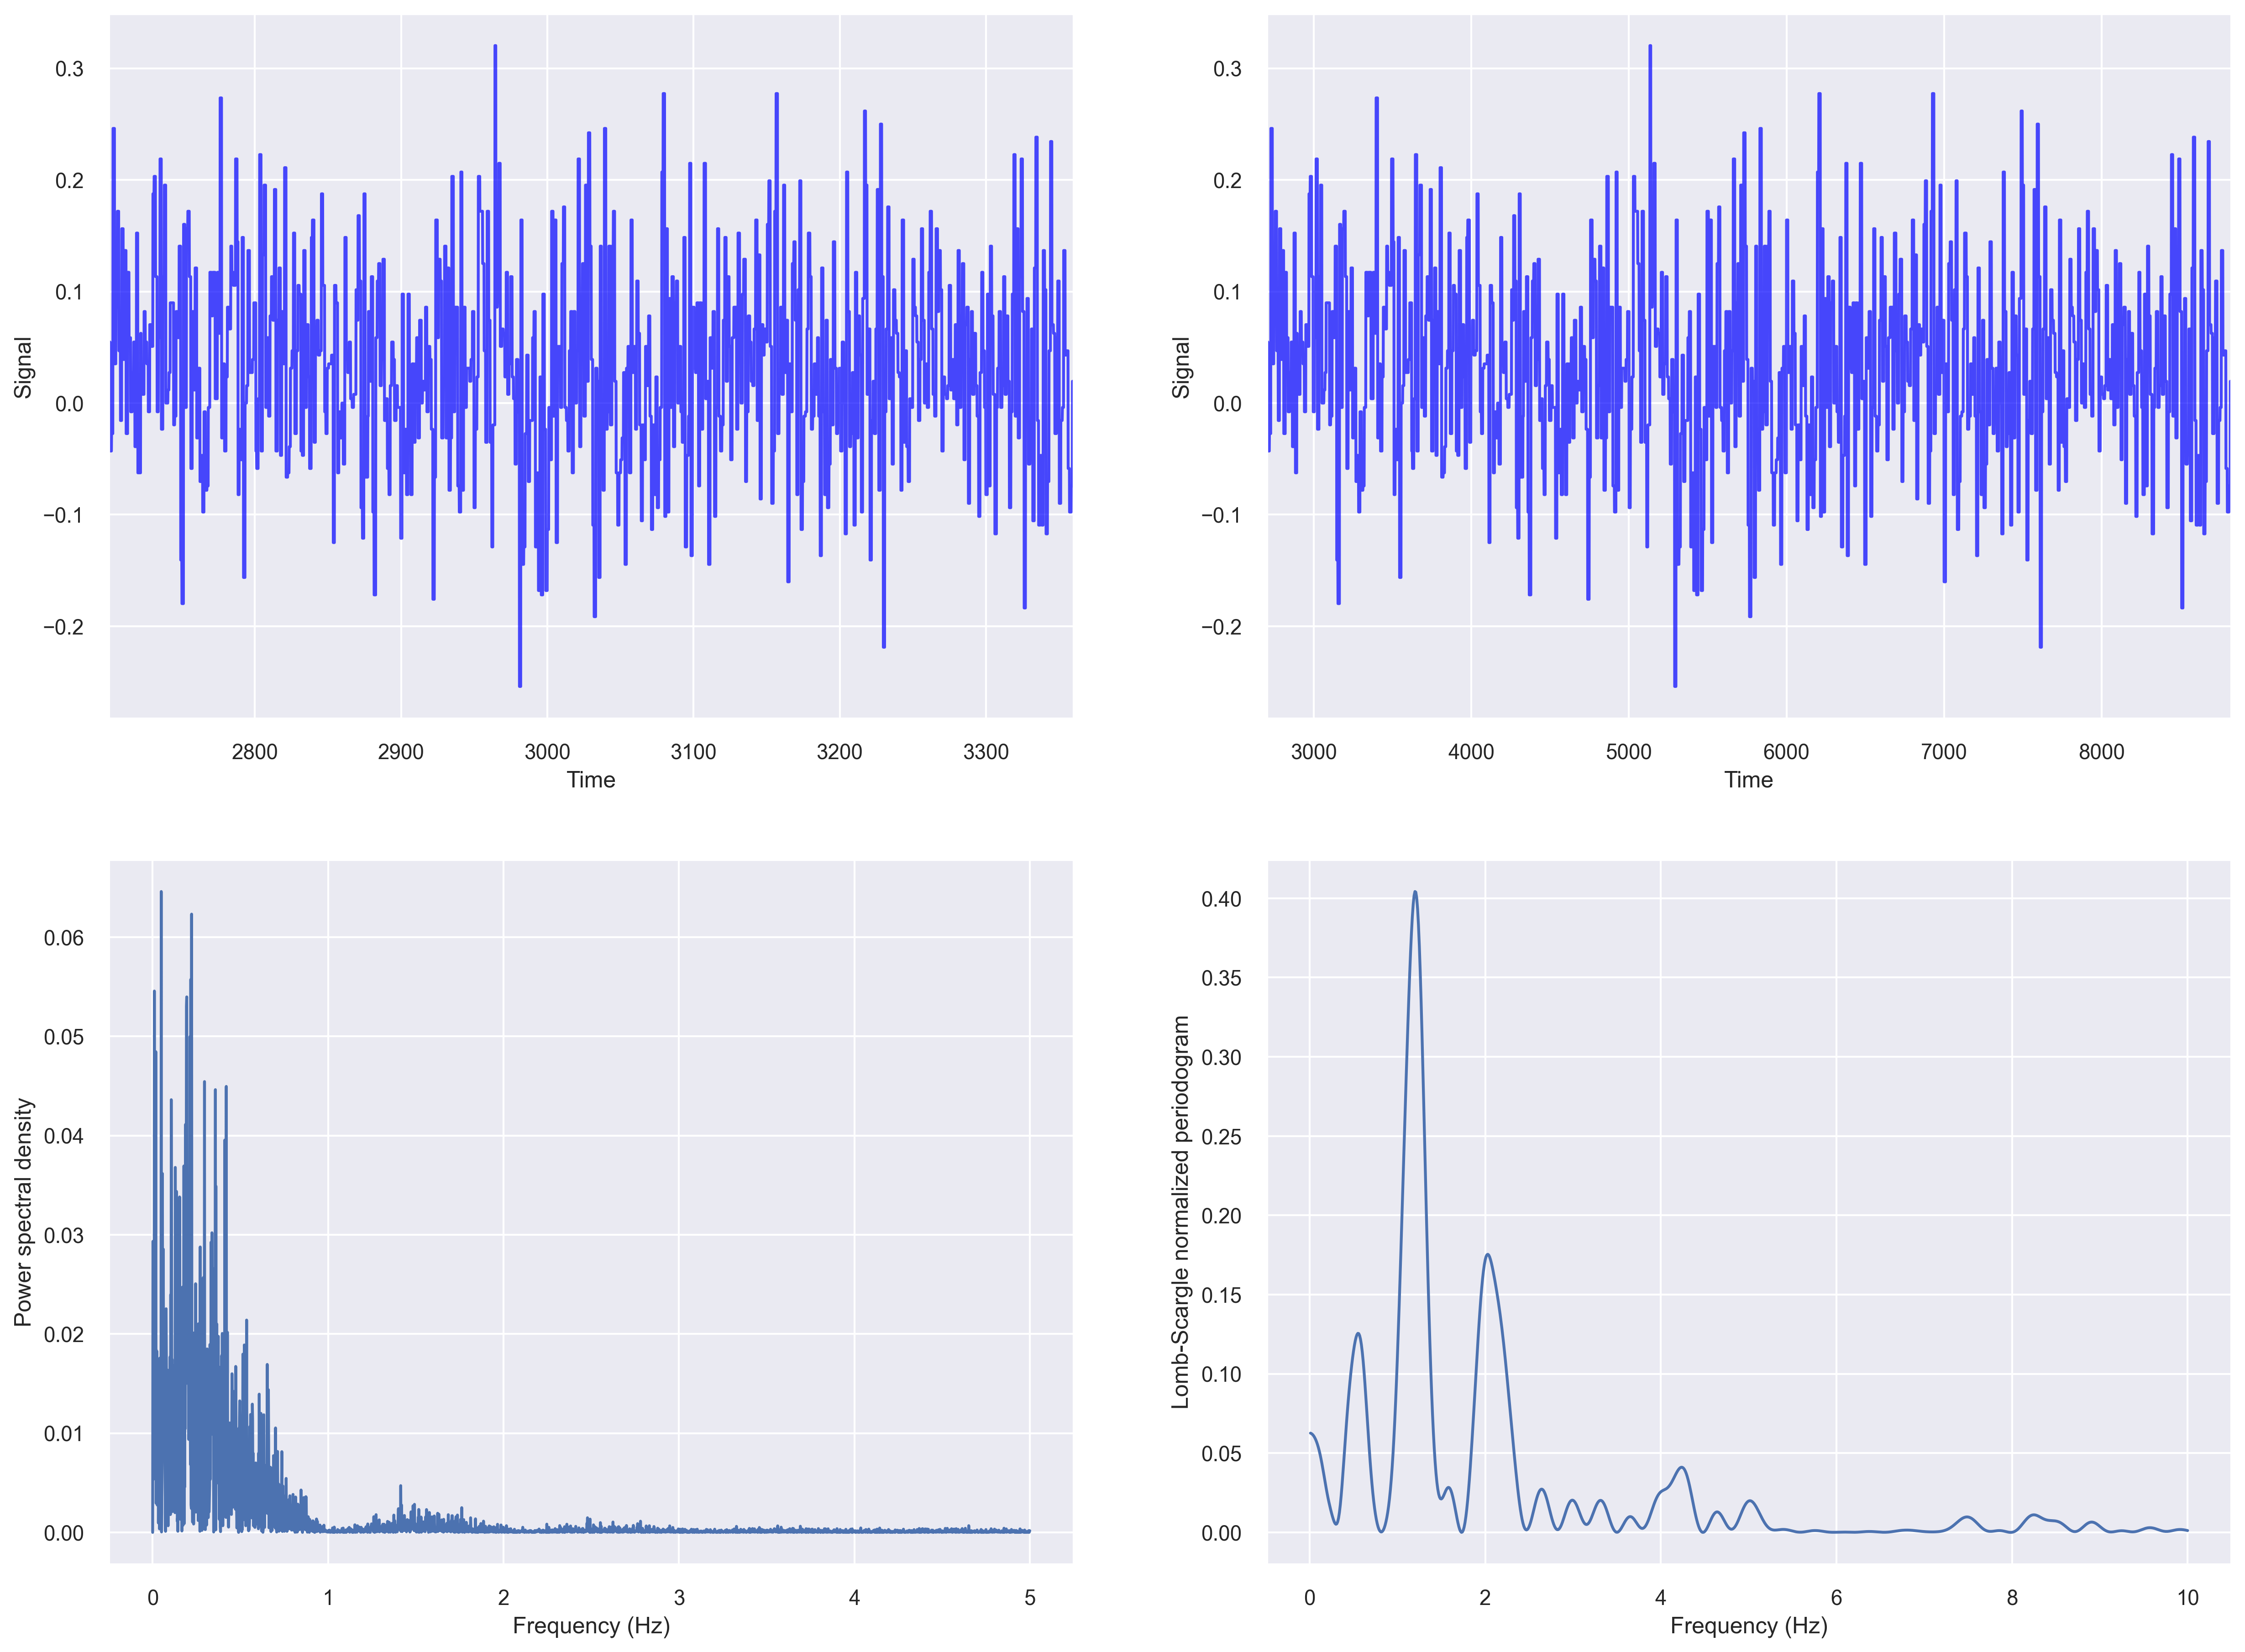 How to deal with irregularly sampled time series data
